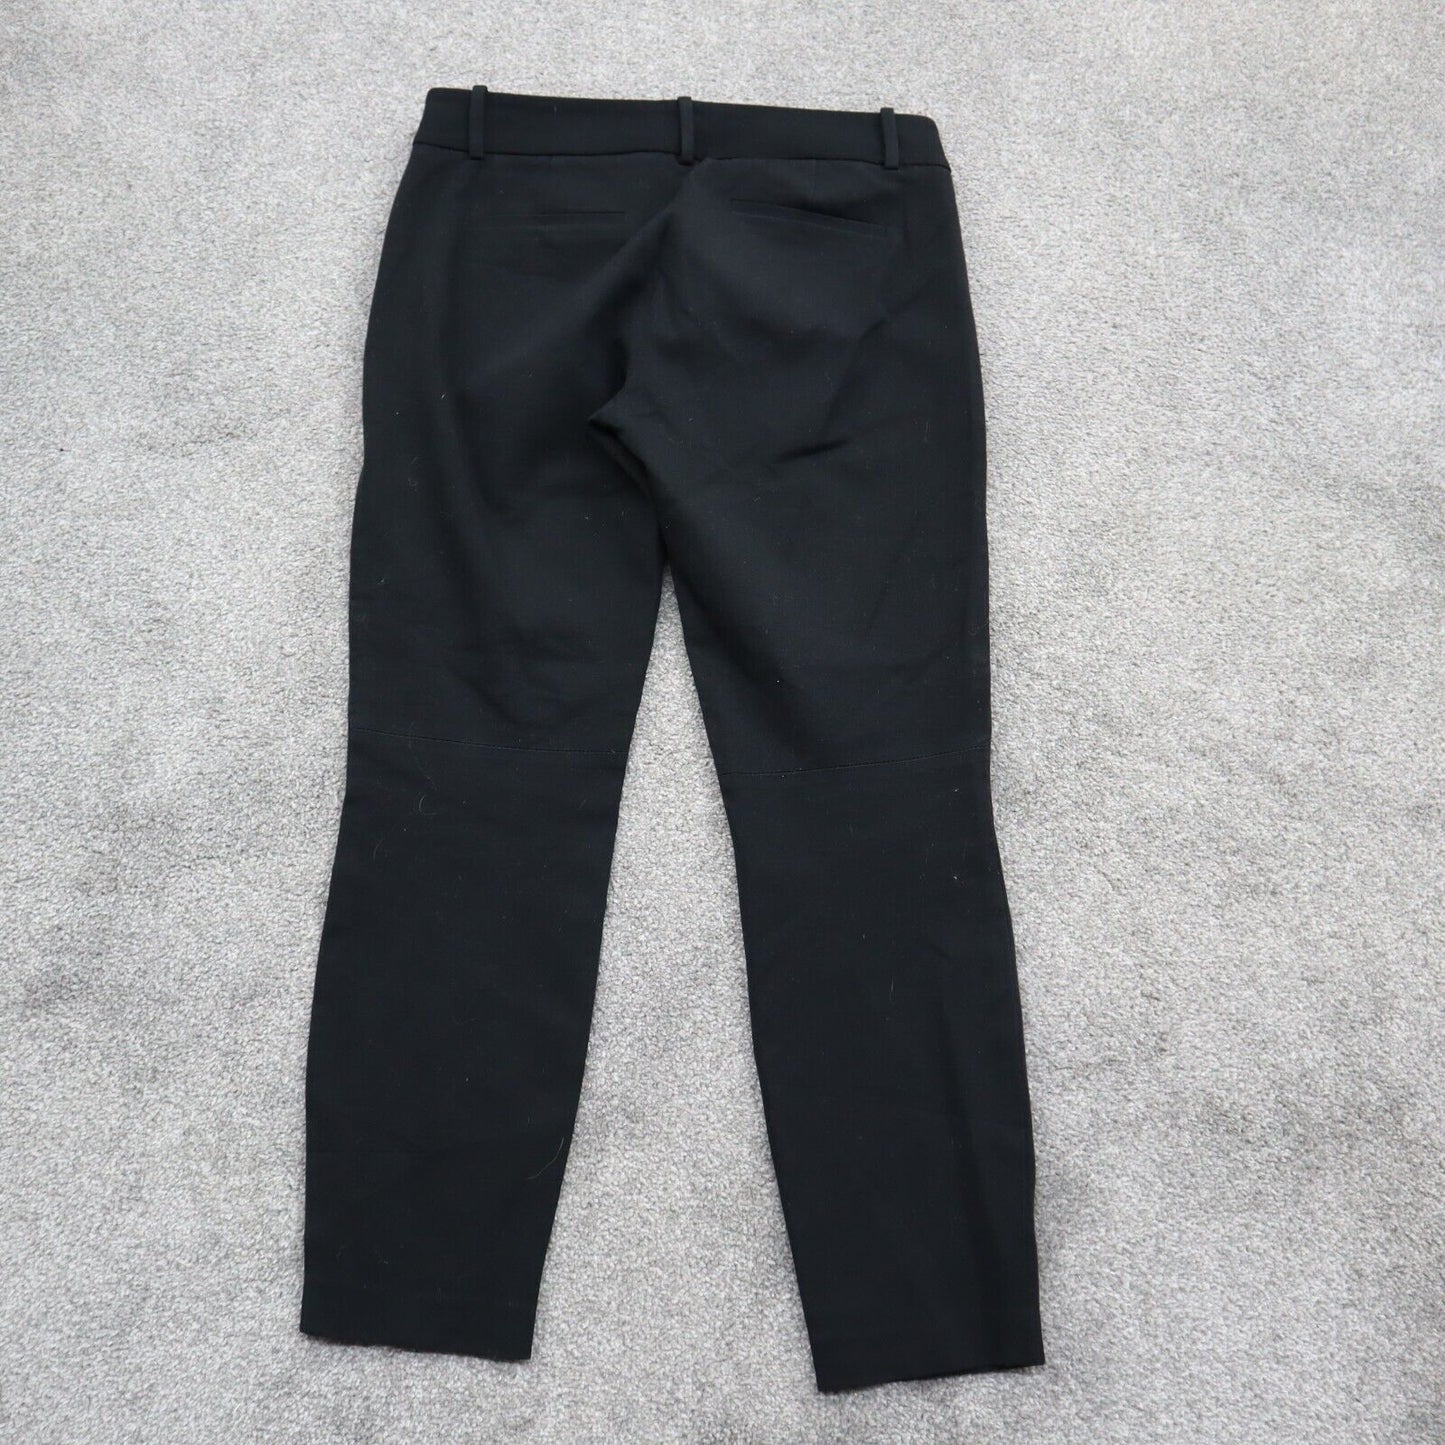 J Crew Womens Casual Dress Pants Stretch Mid Rise Flat Front Black Size 2